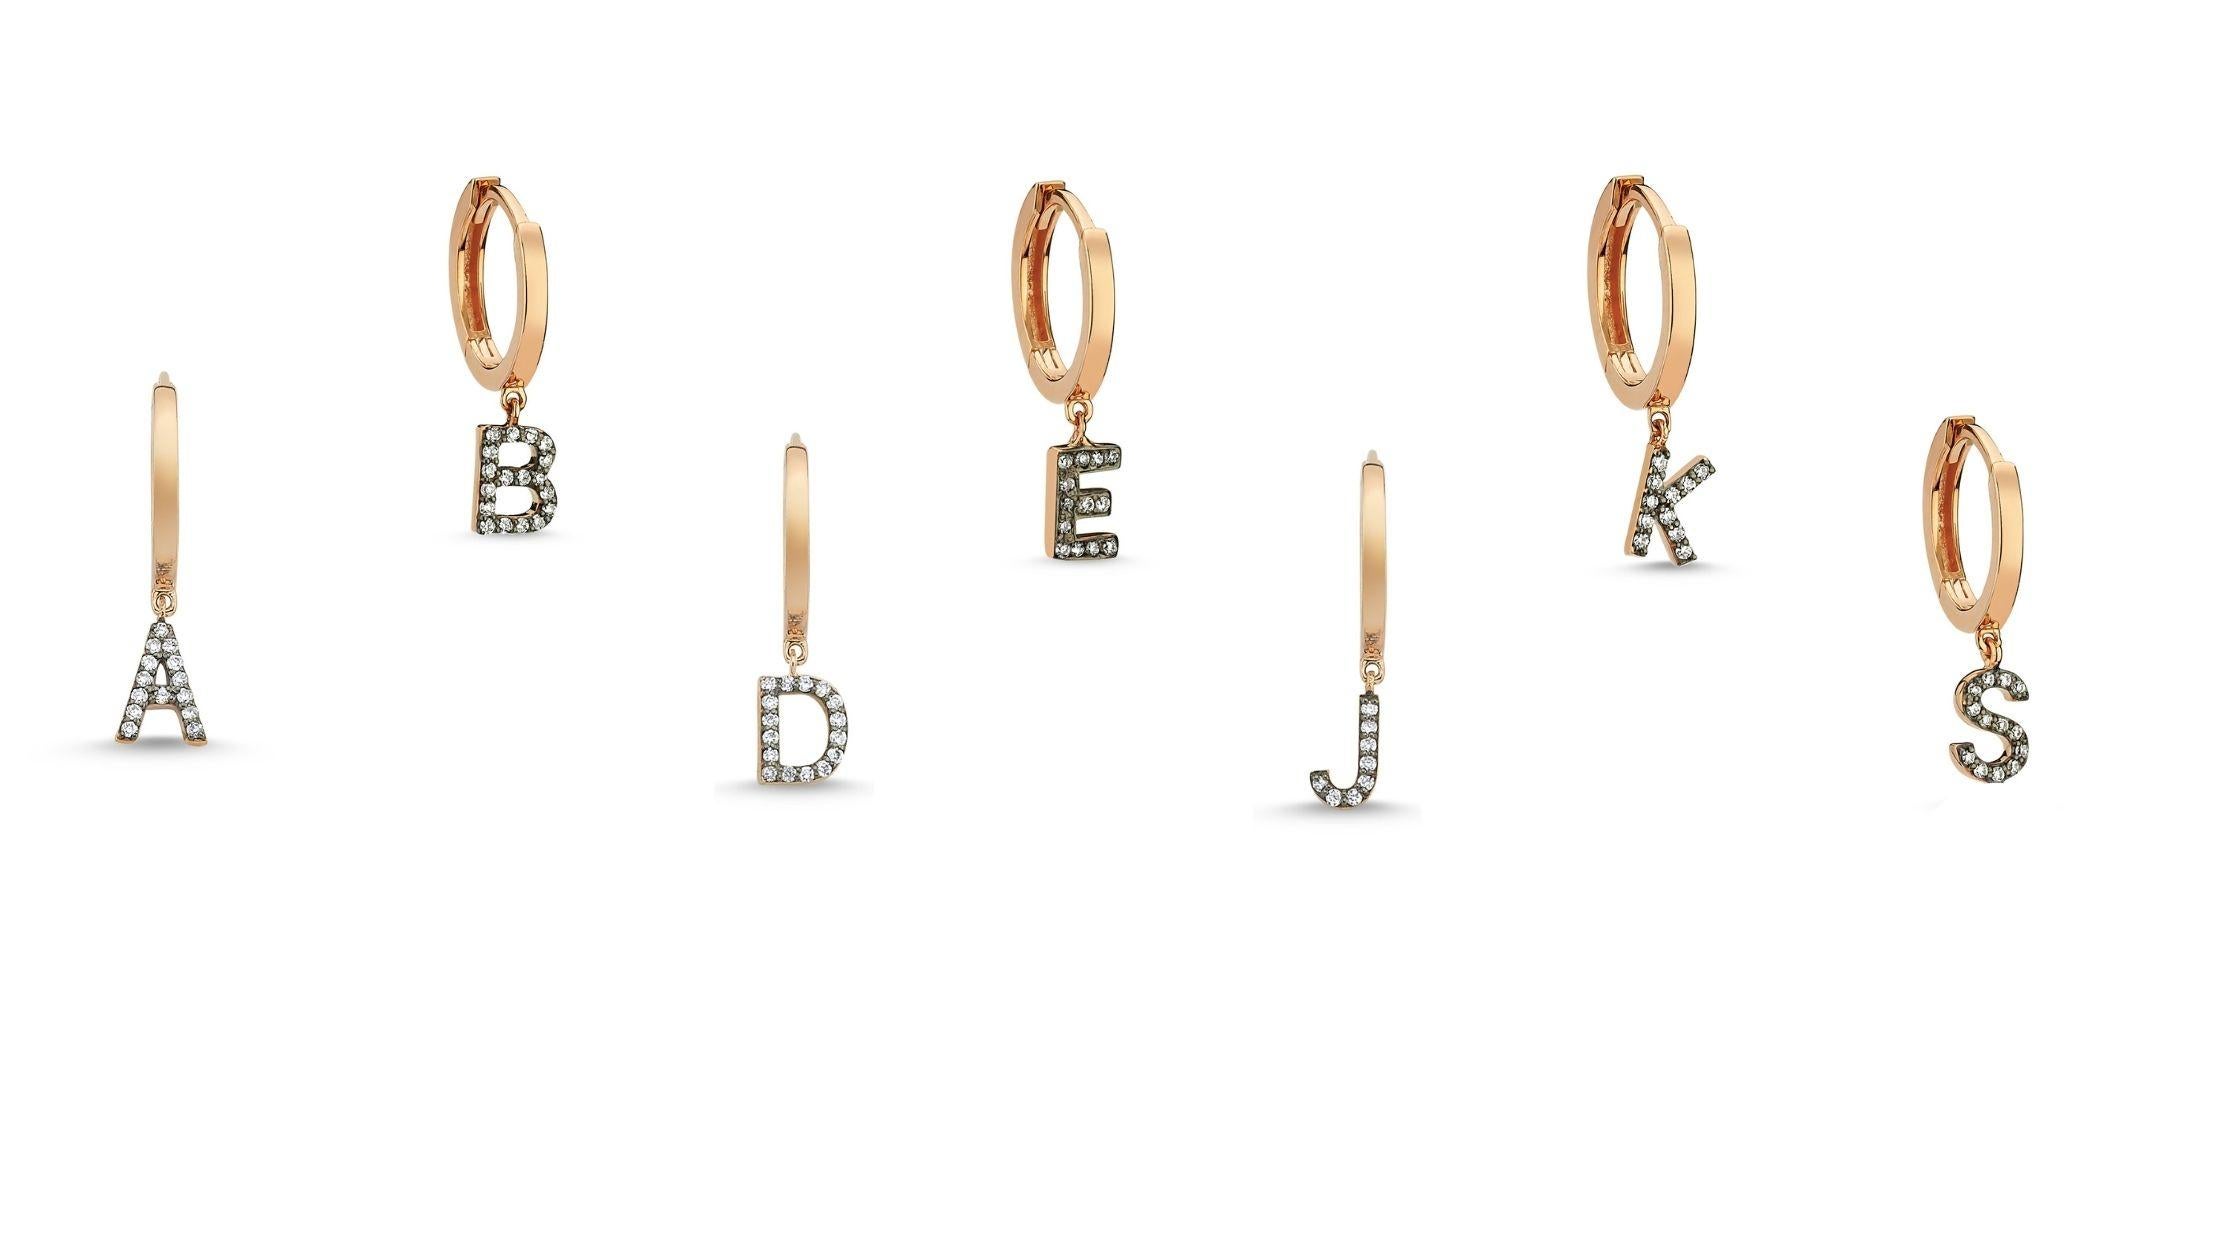 Letter M (single) 14k rose gold earring with white diamond by Selda Jewellery

Additional Information:-
Collection: Letter Collection
14k Rose gold
0.06ct White diamond
Letter height 1cm